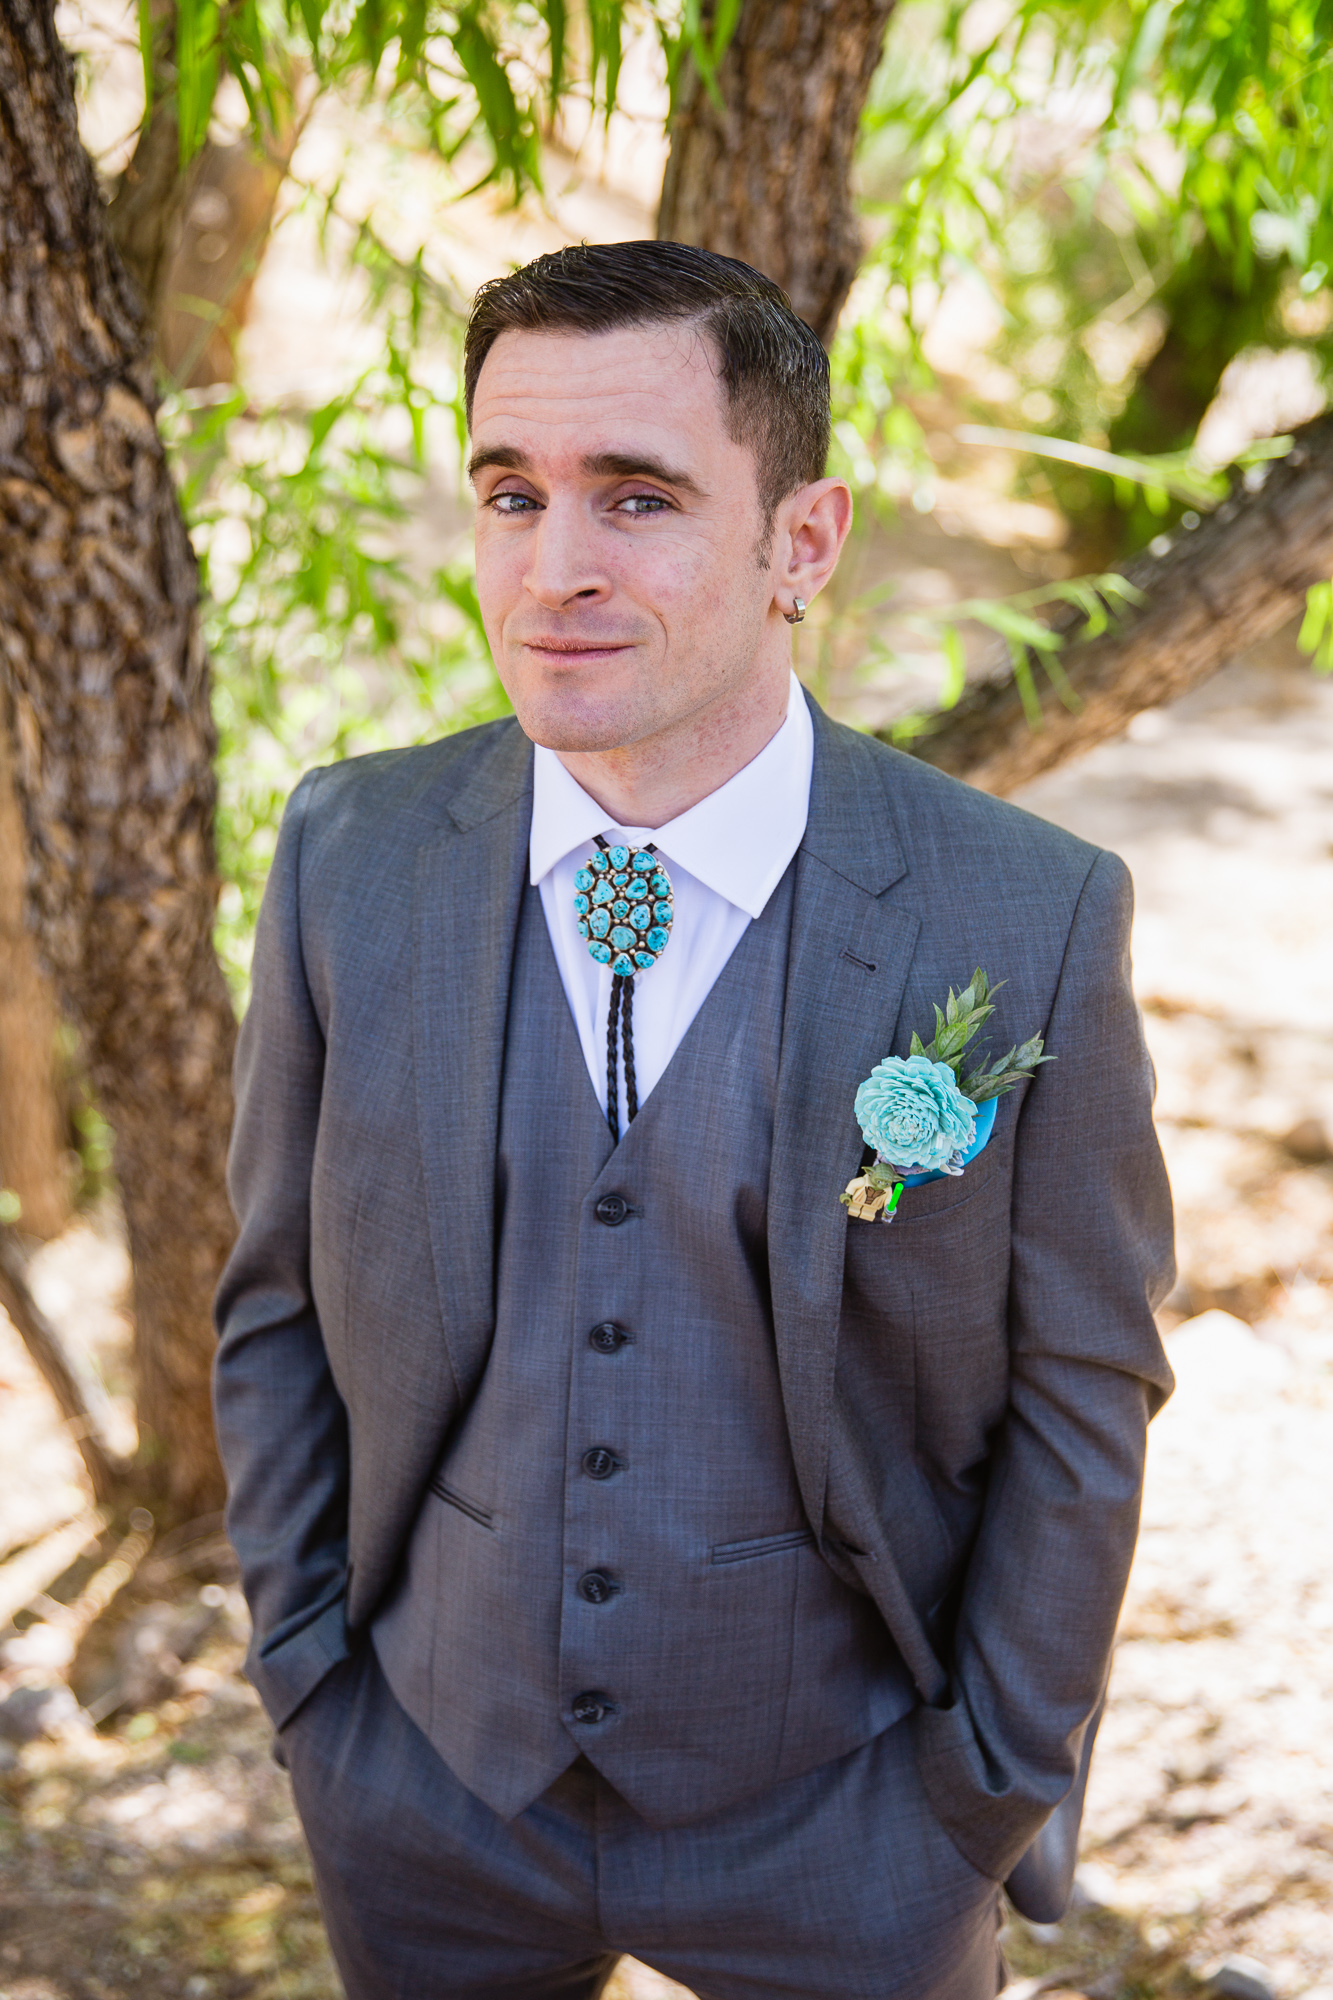 Groom in a grey quit with turquoise details and bolo tie by Arizona wedding photographer PMA Photography.